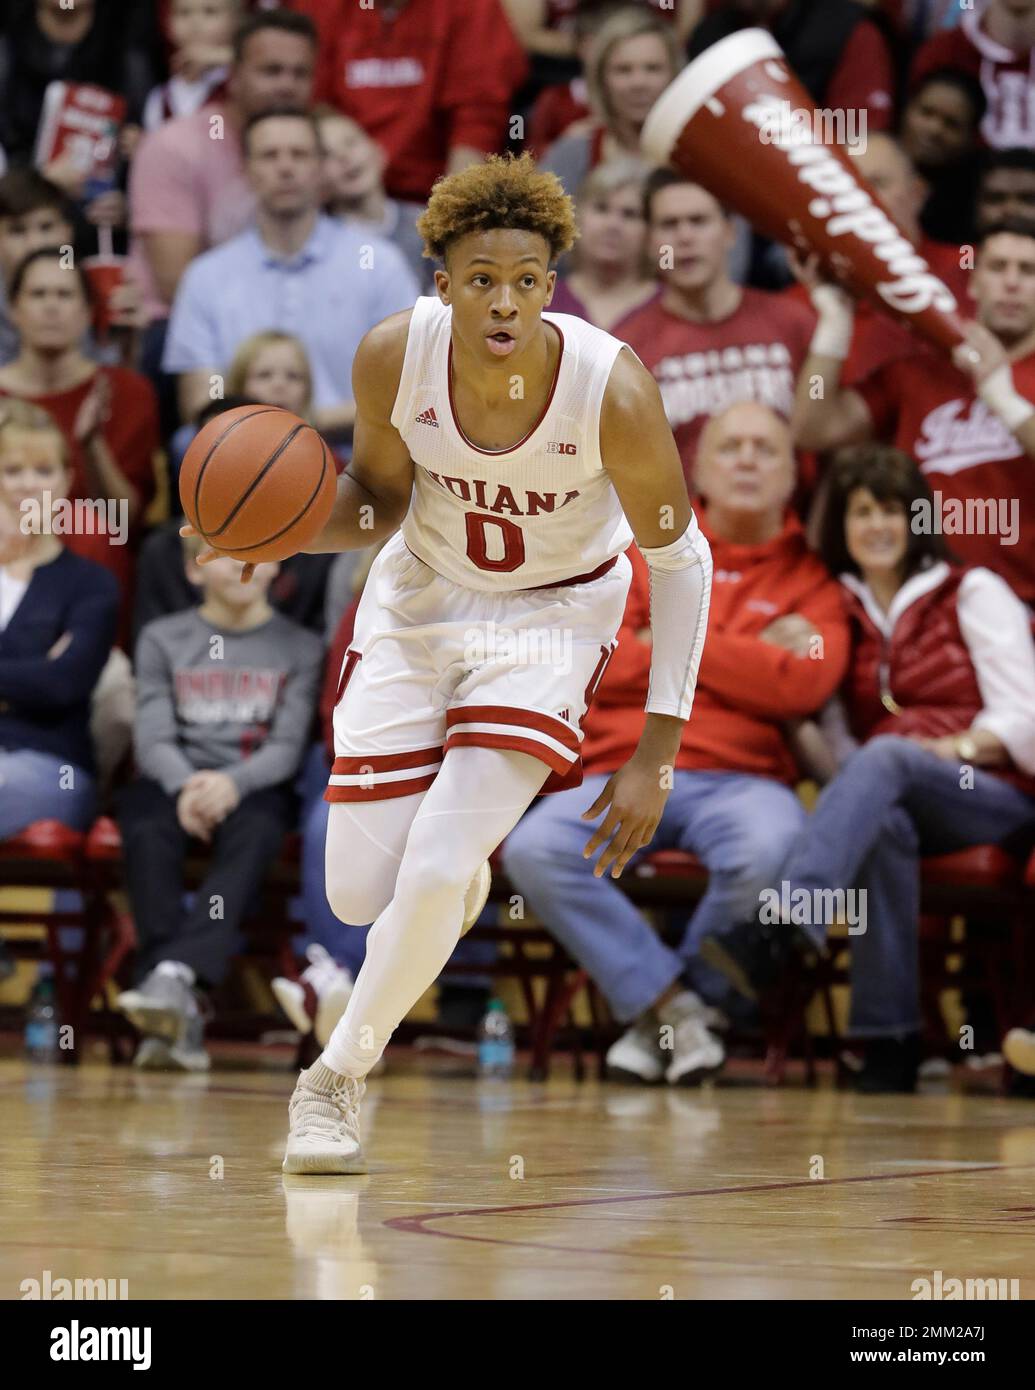 Indiana's Romeo Langford dribbles during the second half of an